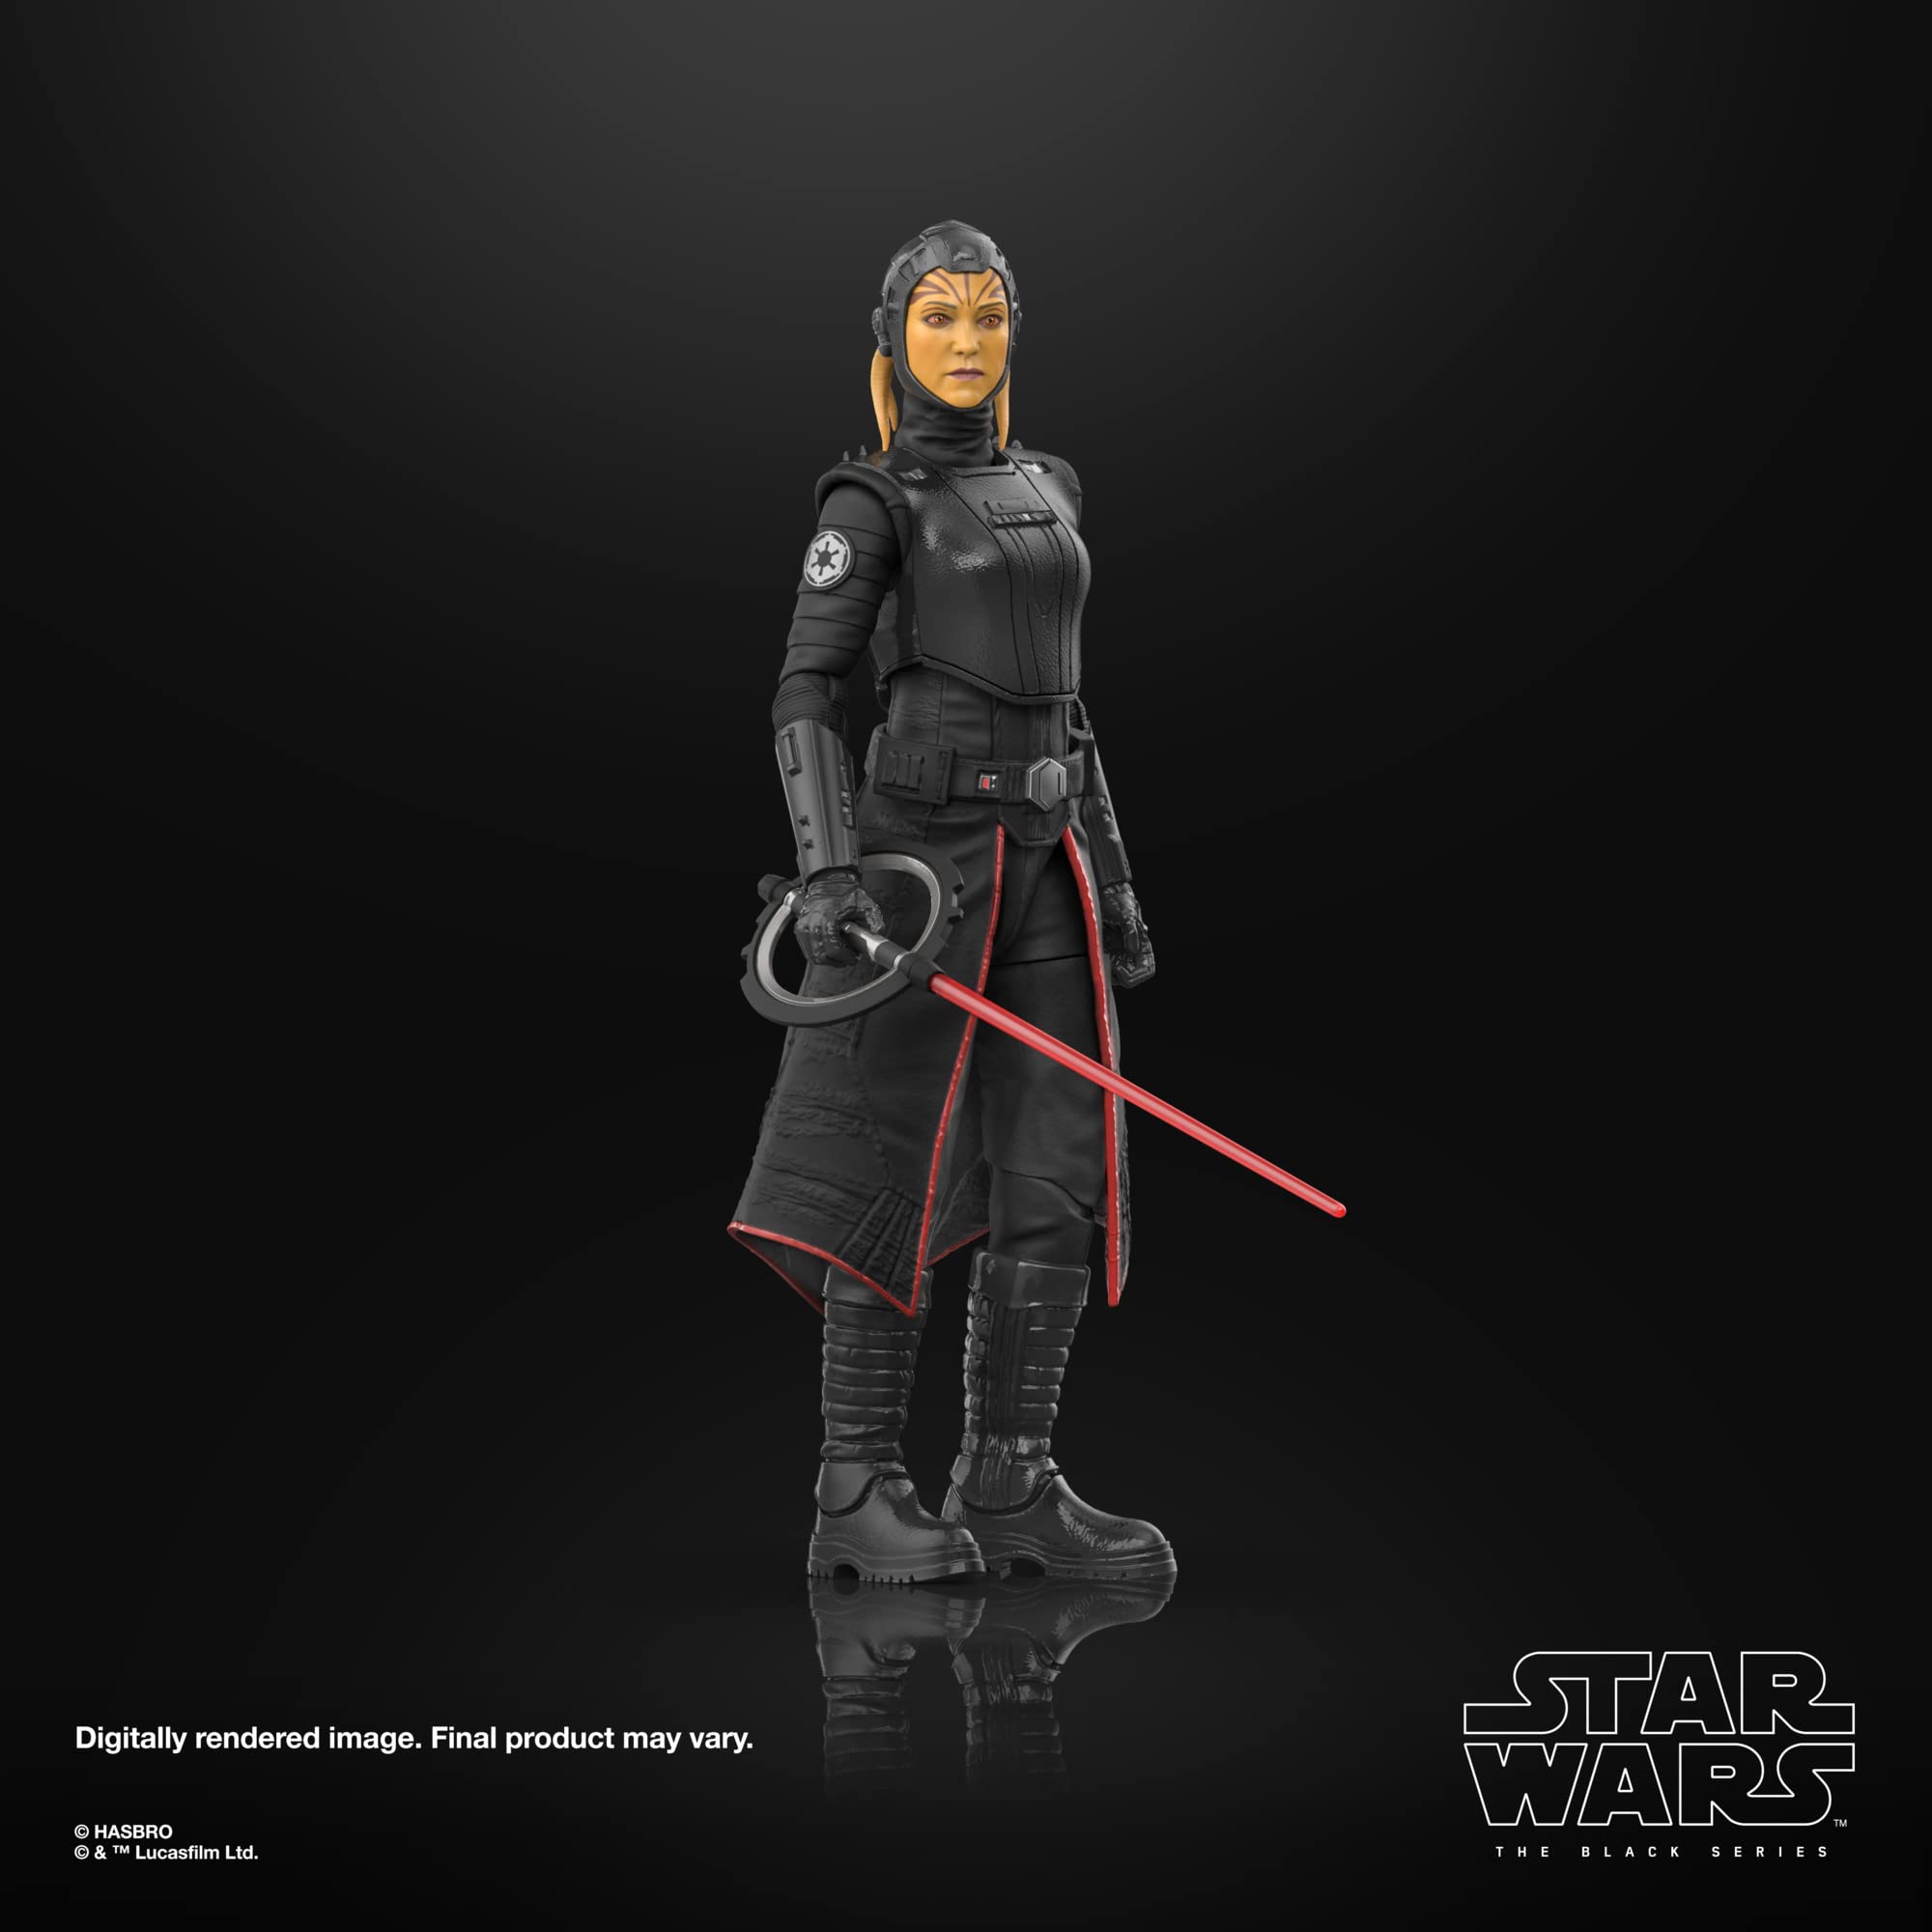 STAR WARS The Black Series Inquisitor – Fourth Sister, OBI-Wan Kenobi 6-Inch Collectible Action Figures, Ages 4 and Up, Multicolored (F7099)